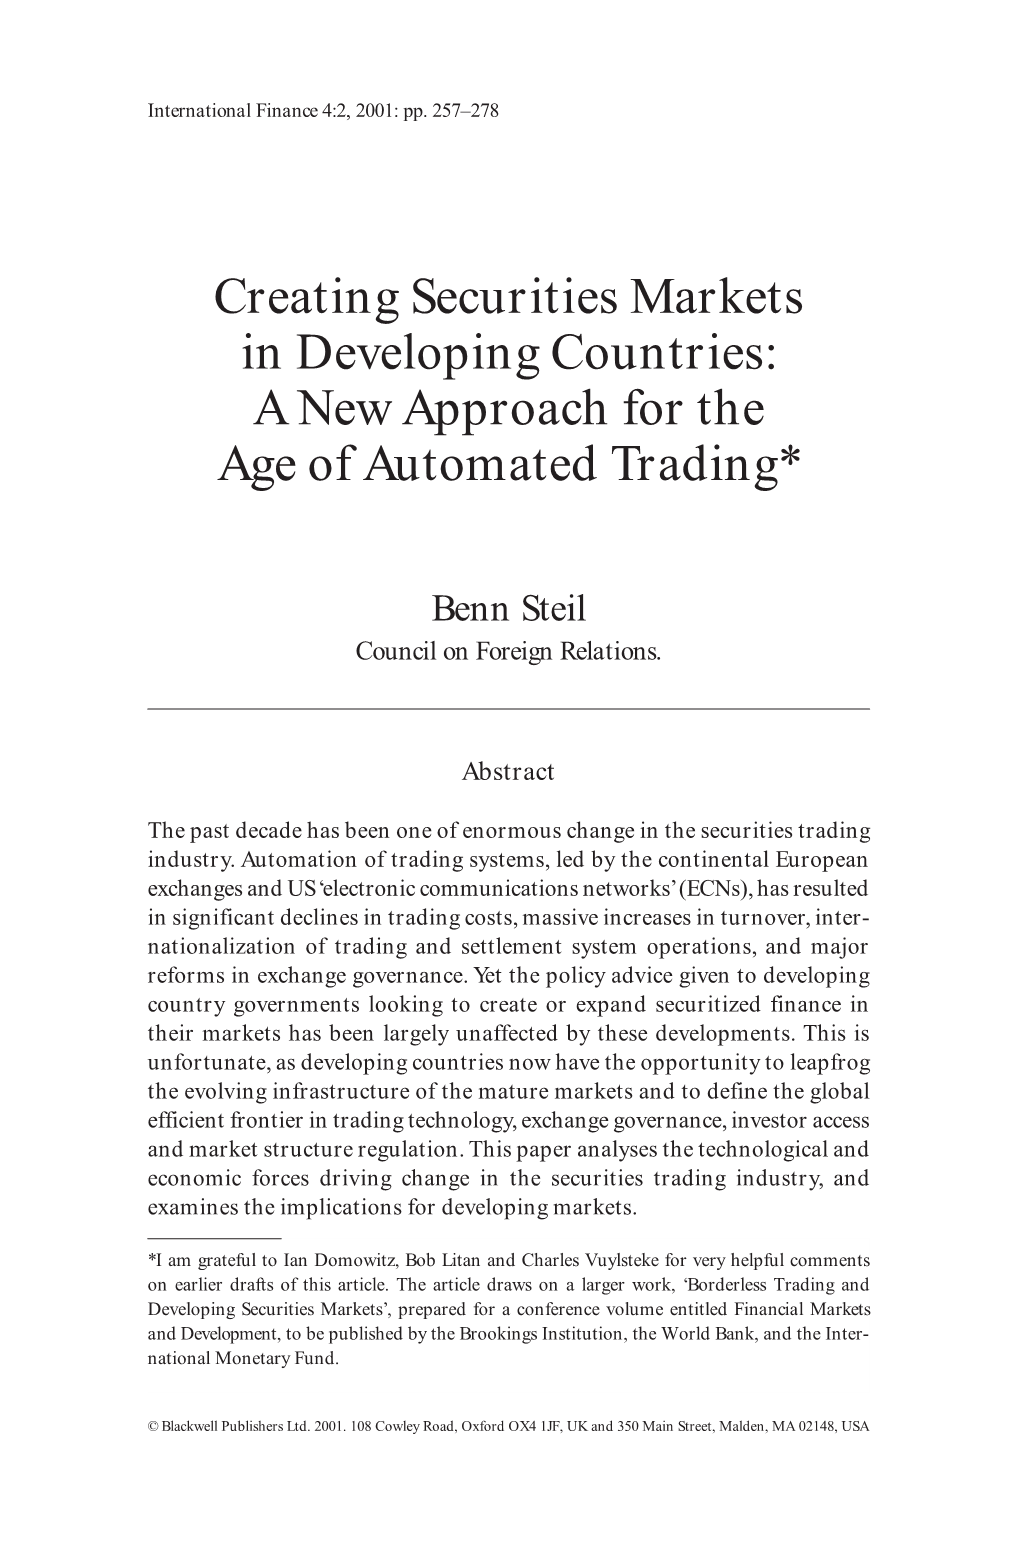 Creating Securities Markets in Developing Countries: a New Approach for the Age of Automated Trading*